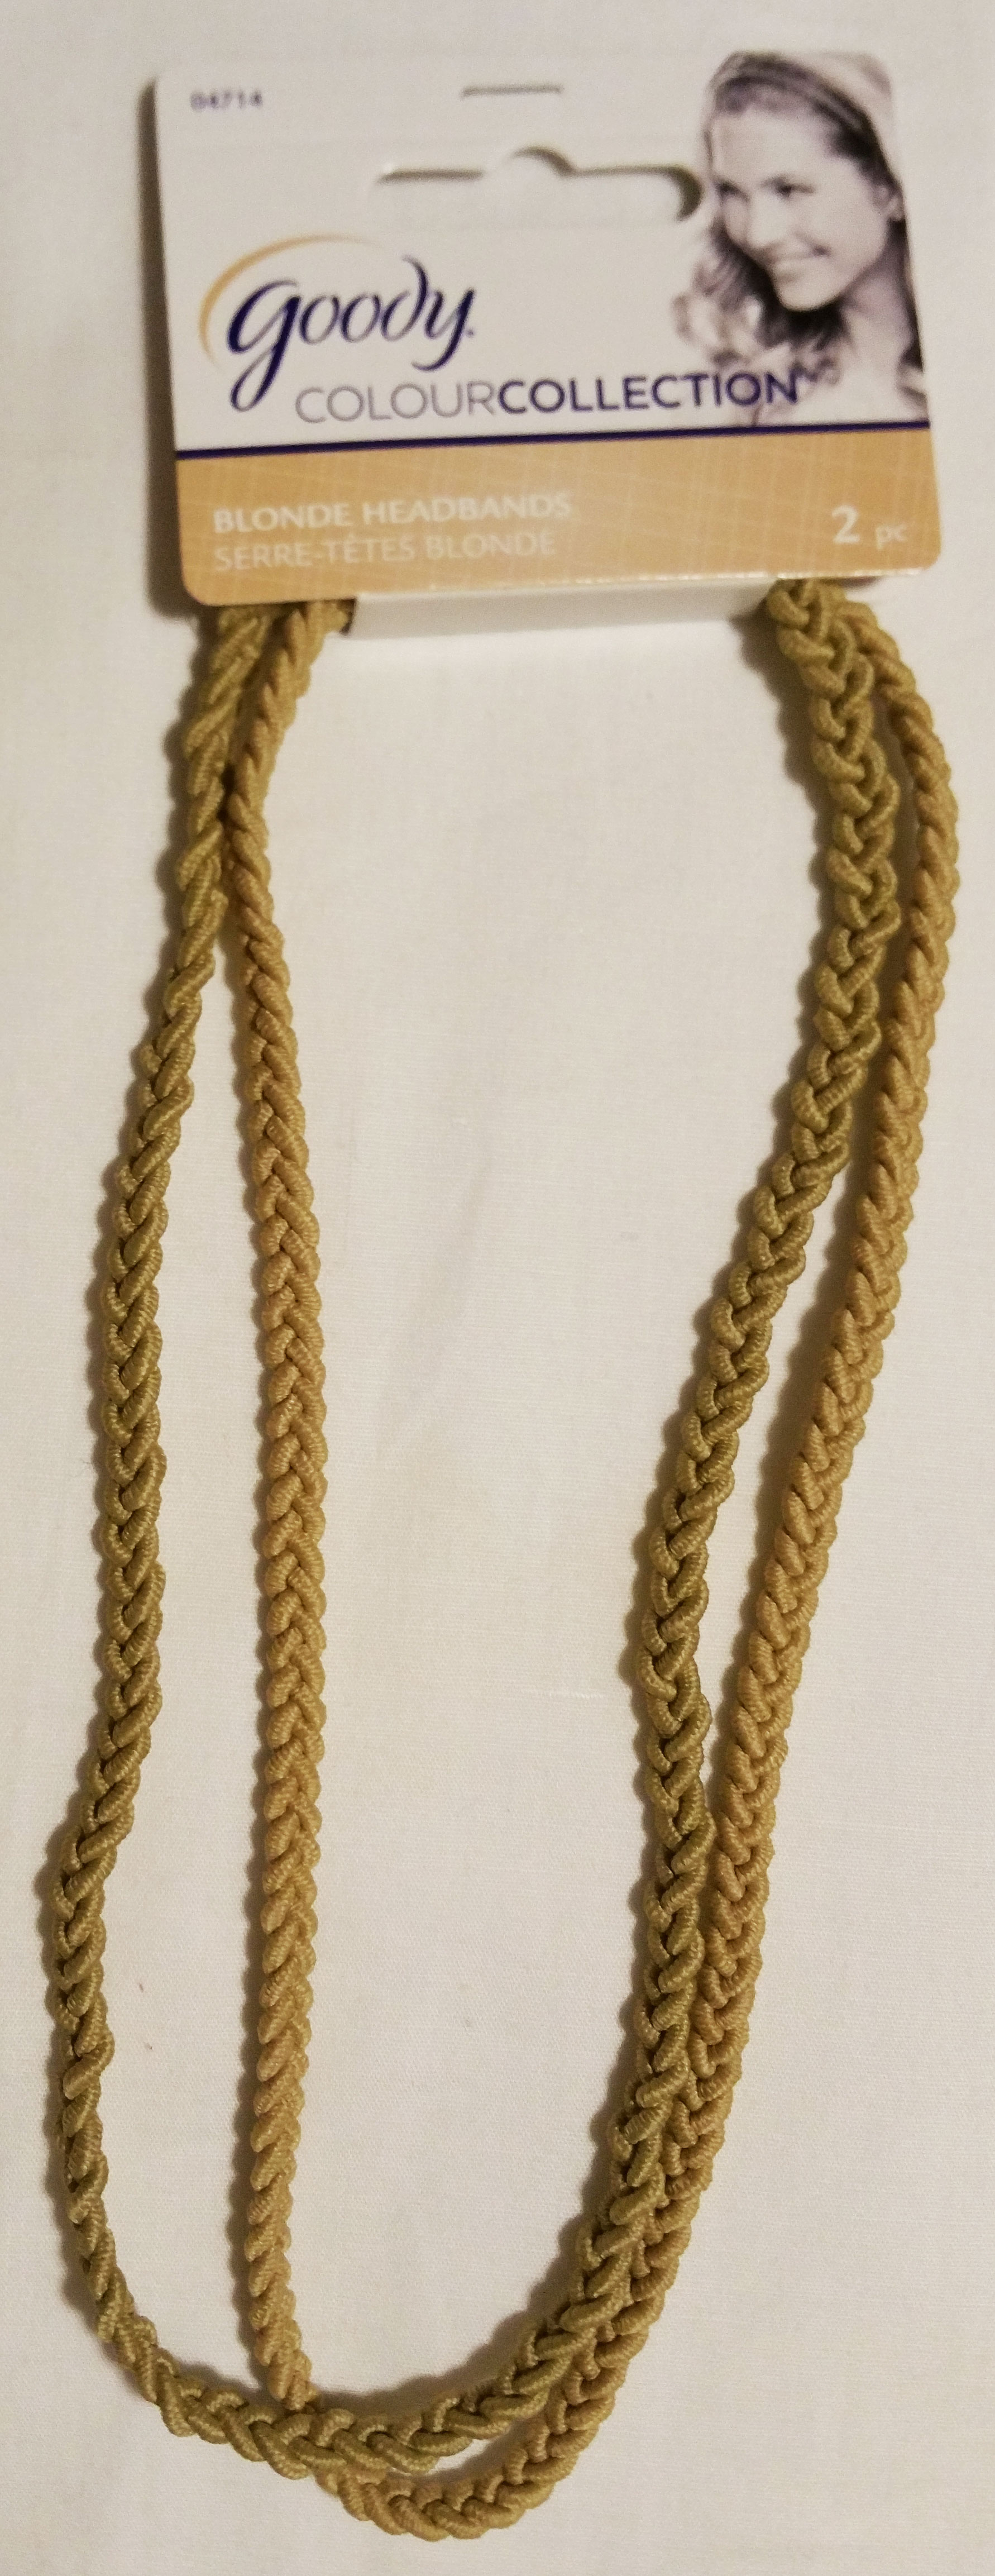 Goody Colour Collection 2 Strand Braided Headband Blonde, 2CT - Click Image to Close